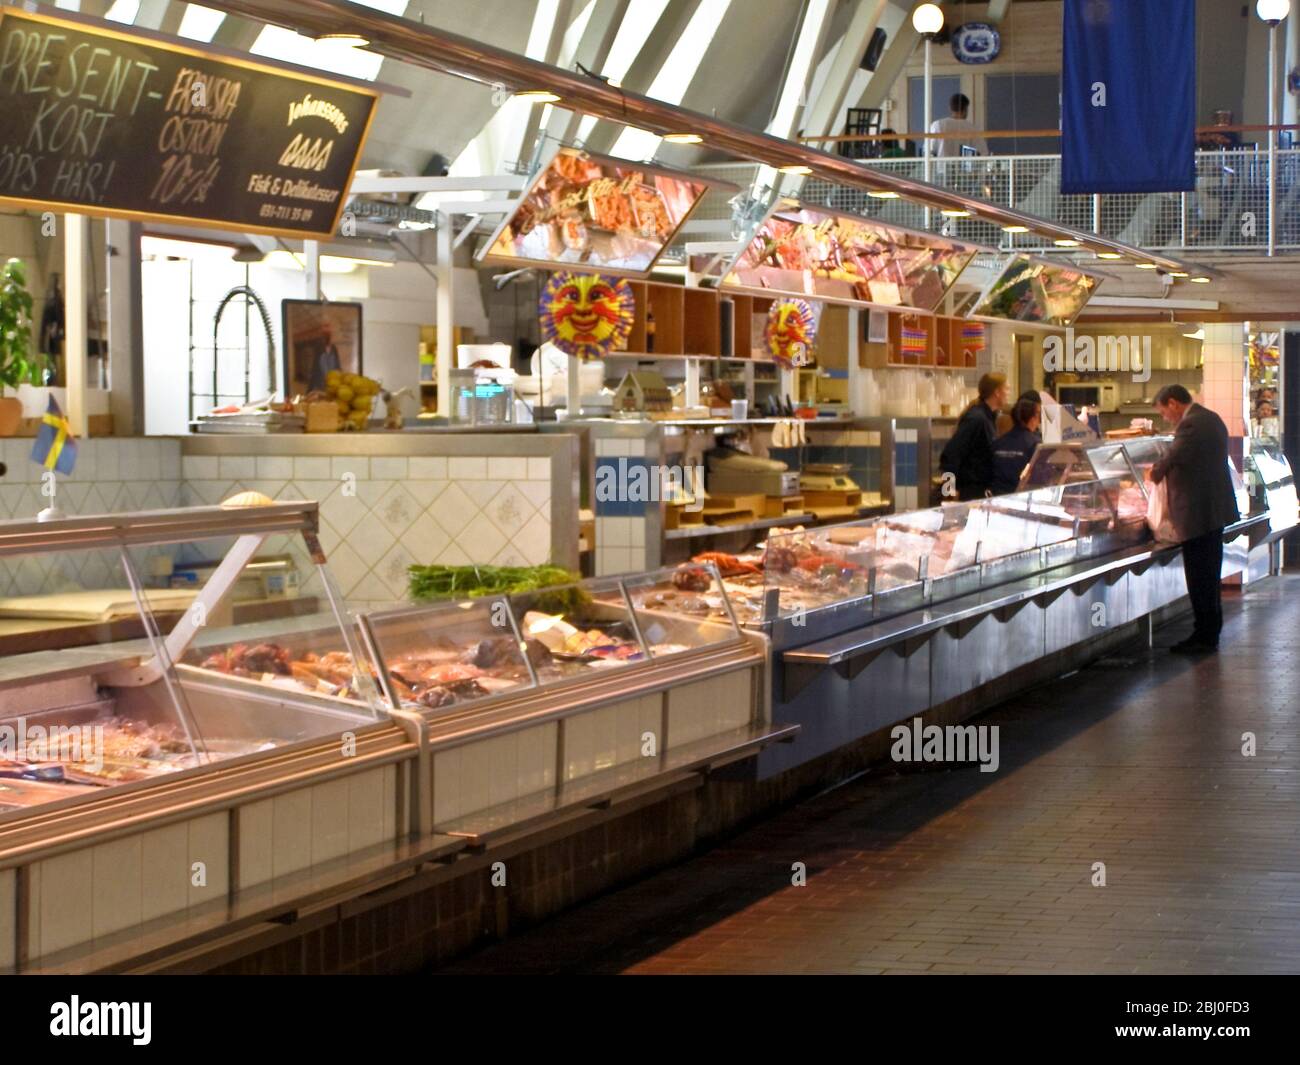 Interior of the 'Feske Kšrka' (Fish Church), the main fish market in Gothenburg, Sweden, showing fish stalls and shoppers. - Stock Photo